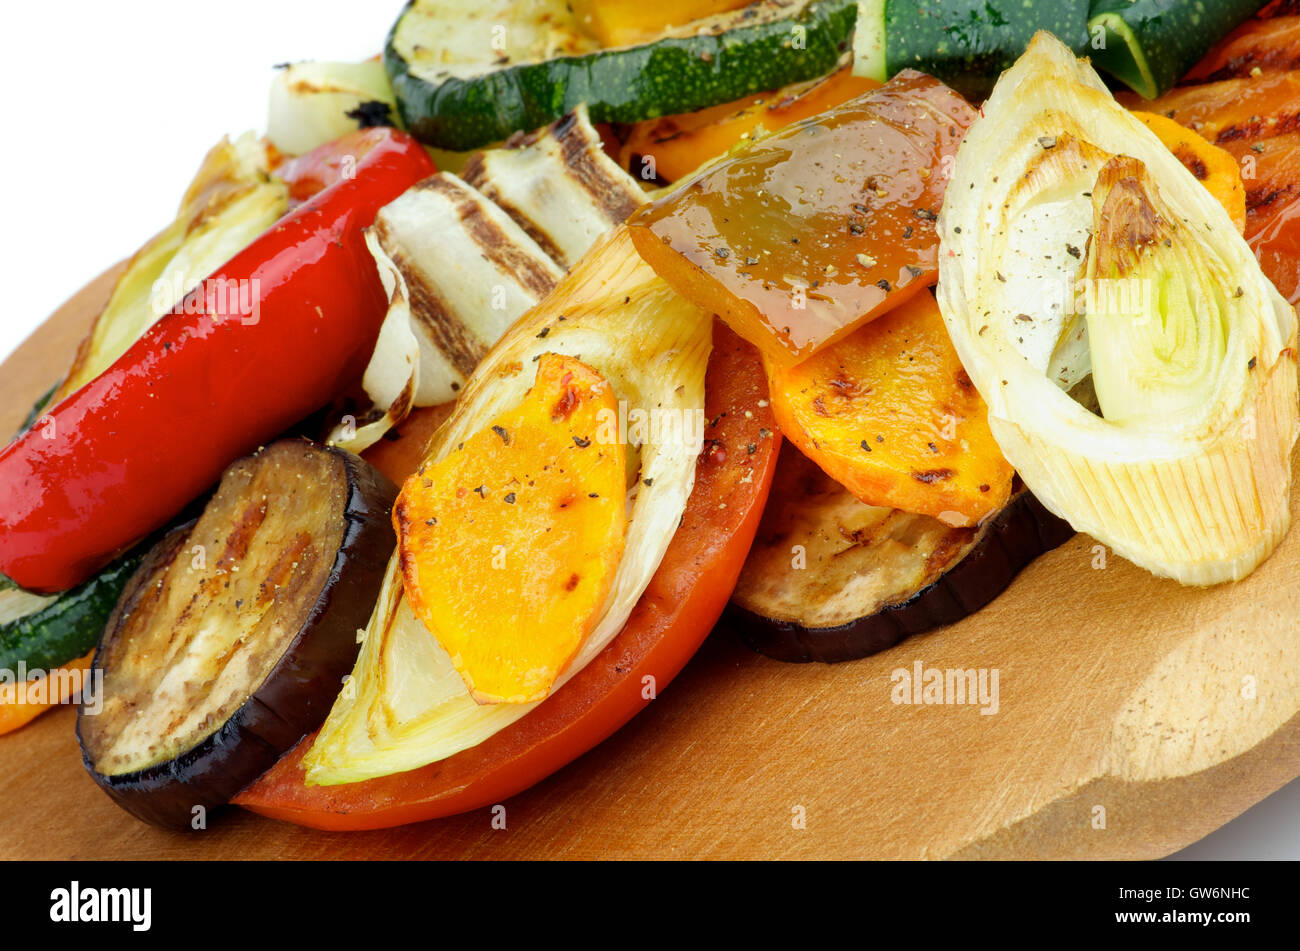 Grilled Vegetables Stock Photo